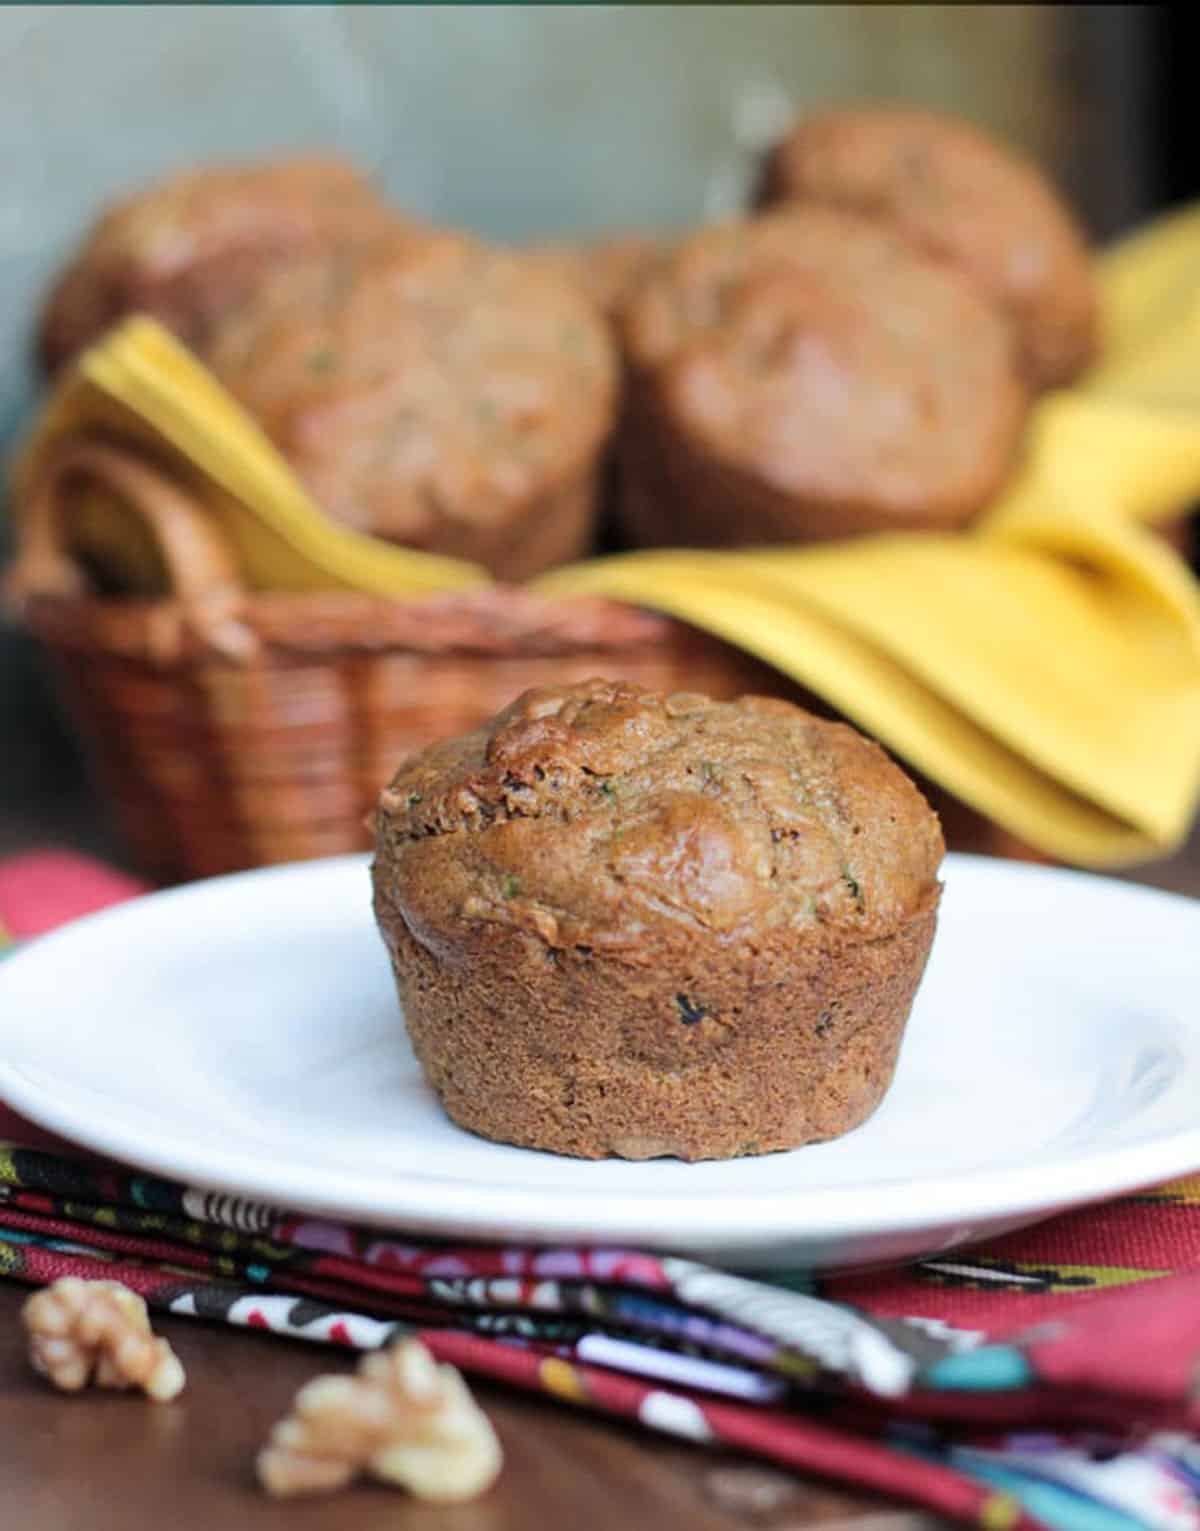 One muffin on a white plate in front of a basket of vegan zucchini muffins.